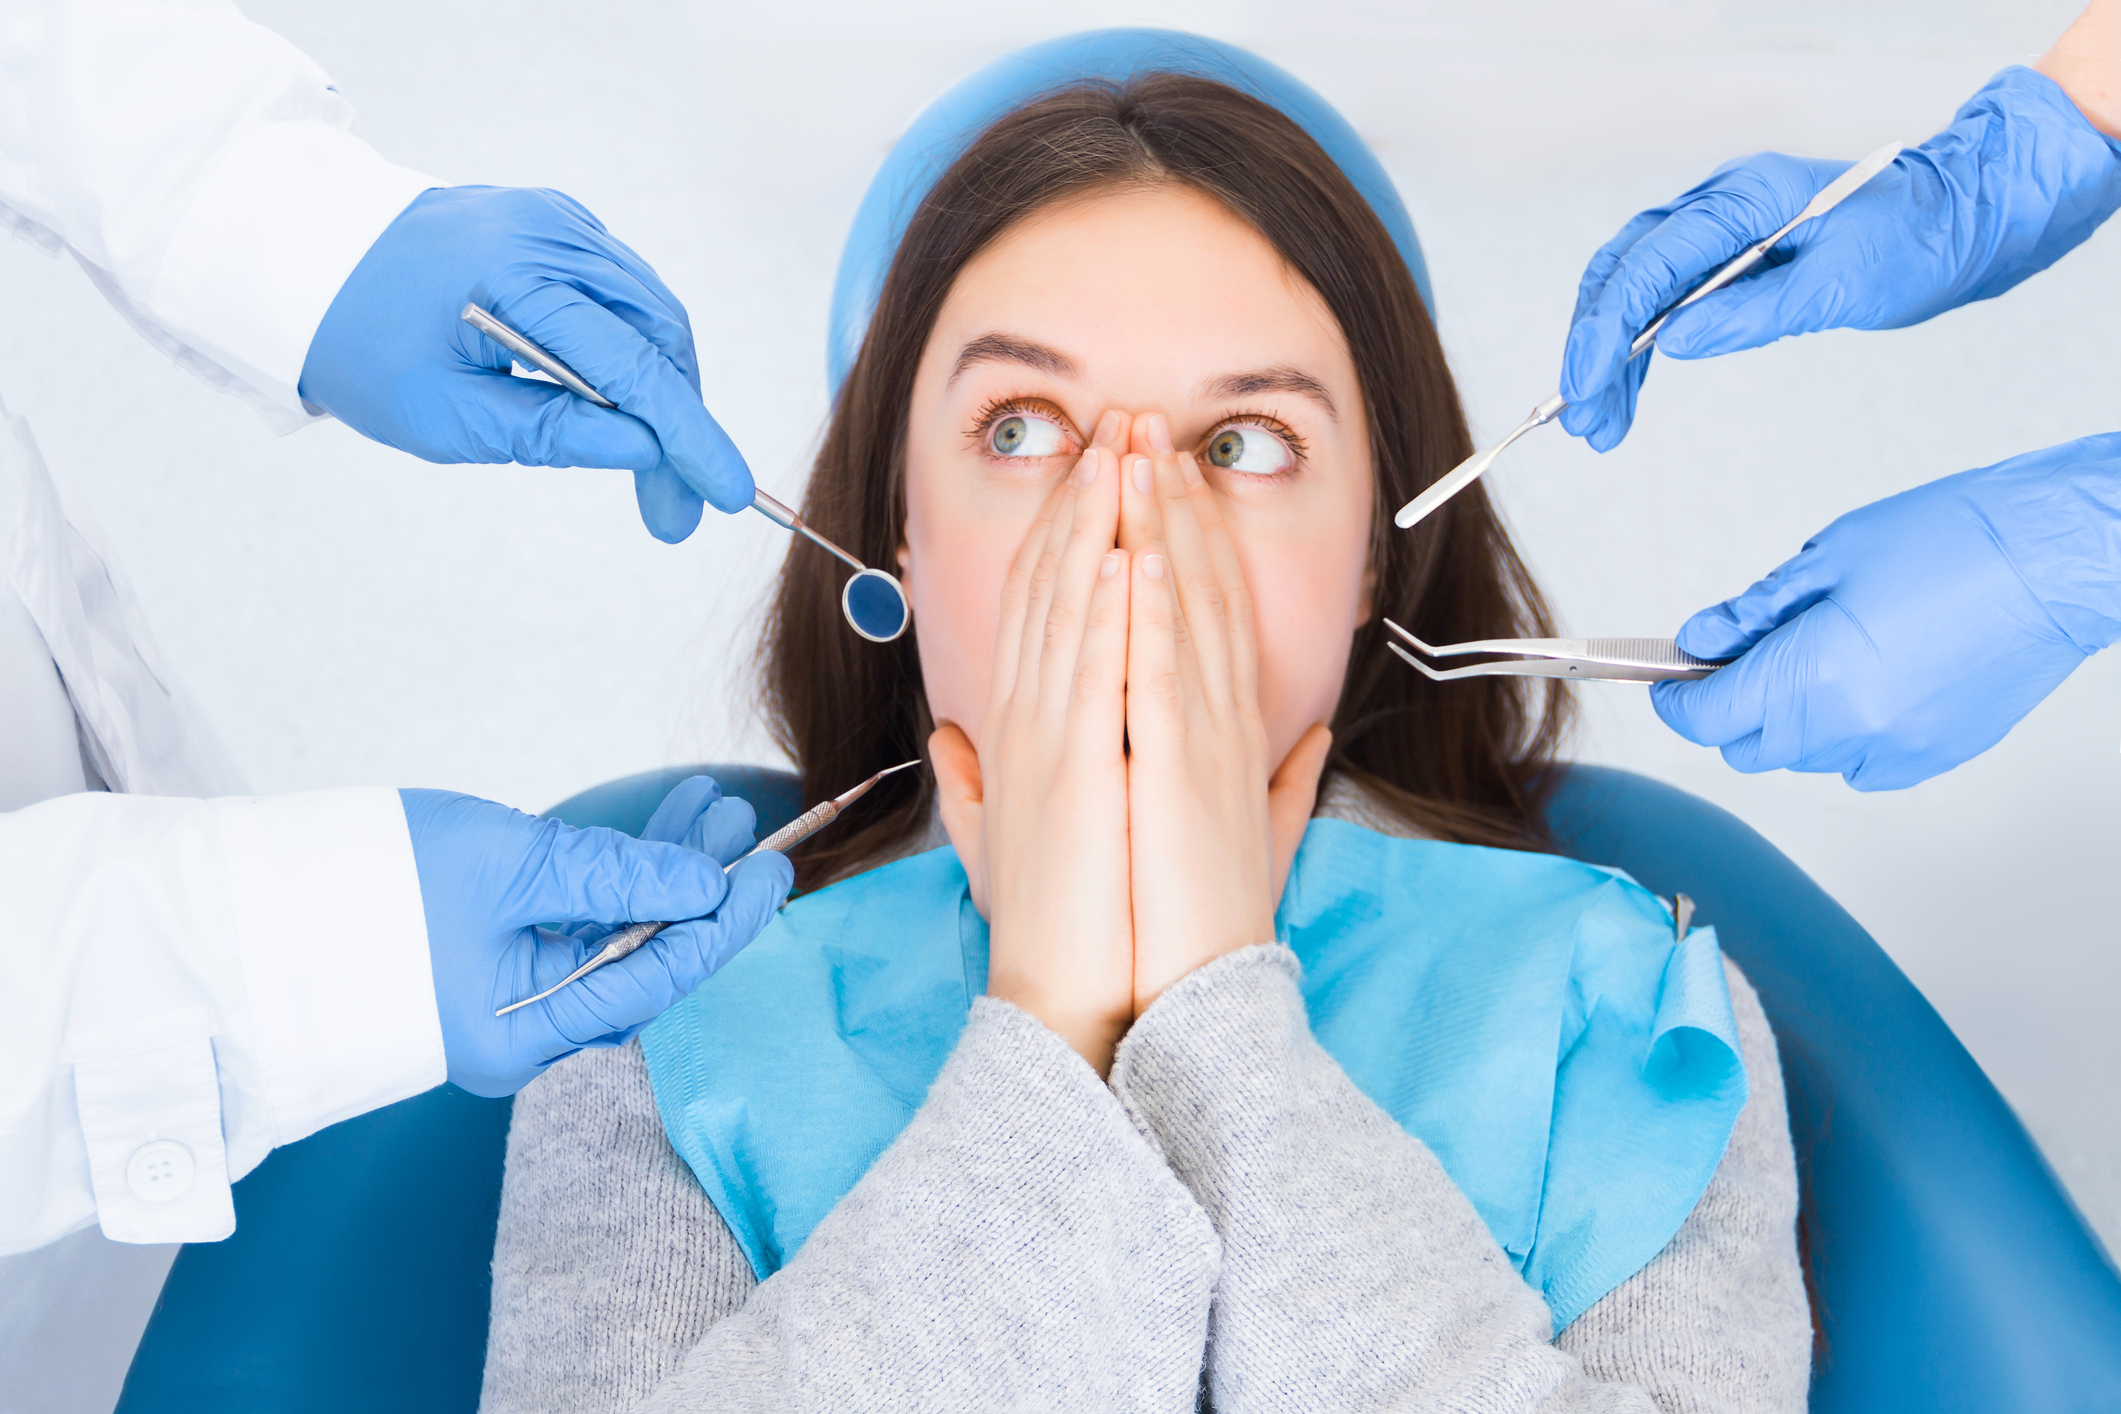 Closeup doctor hands in gloves are holding dental instruments in clinic, office. Scared woman is closing her mouth with hands, preventing examining of teeth, because of fear. Visiting dentist concept.